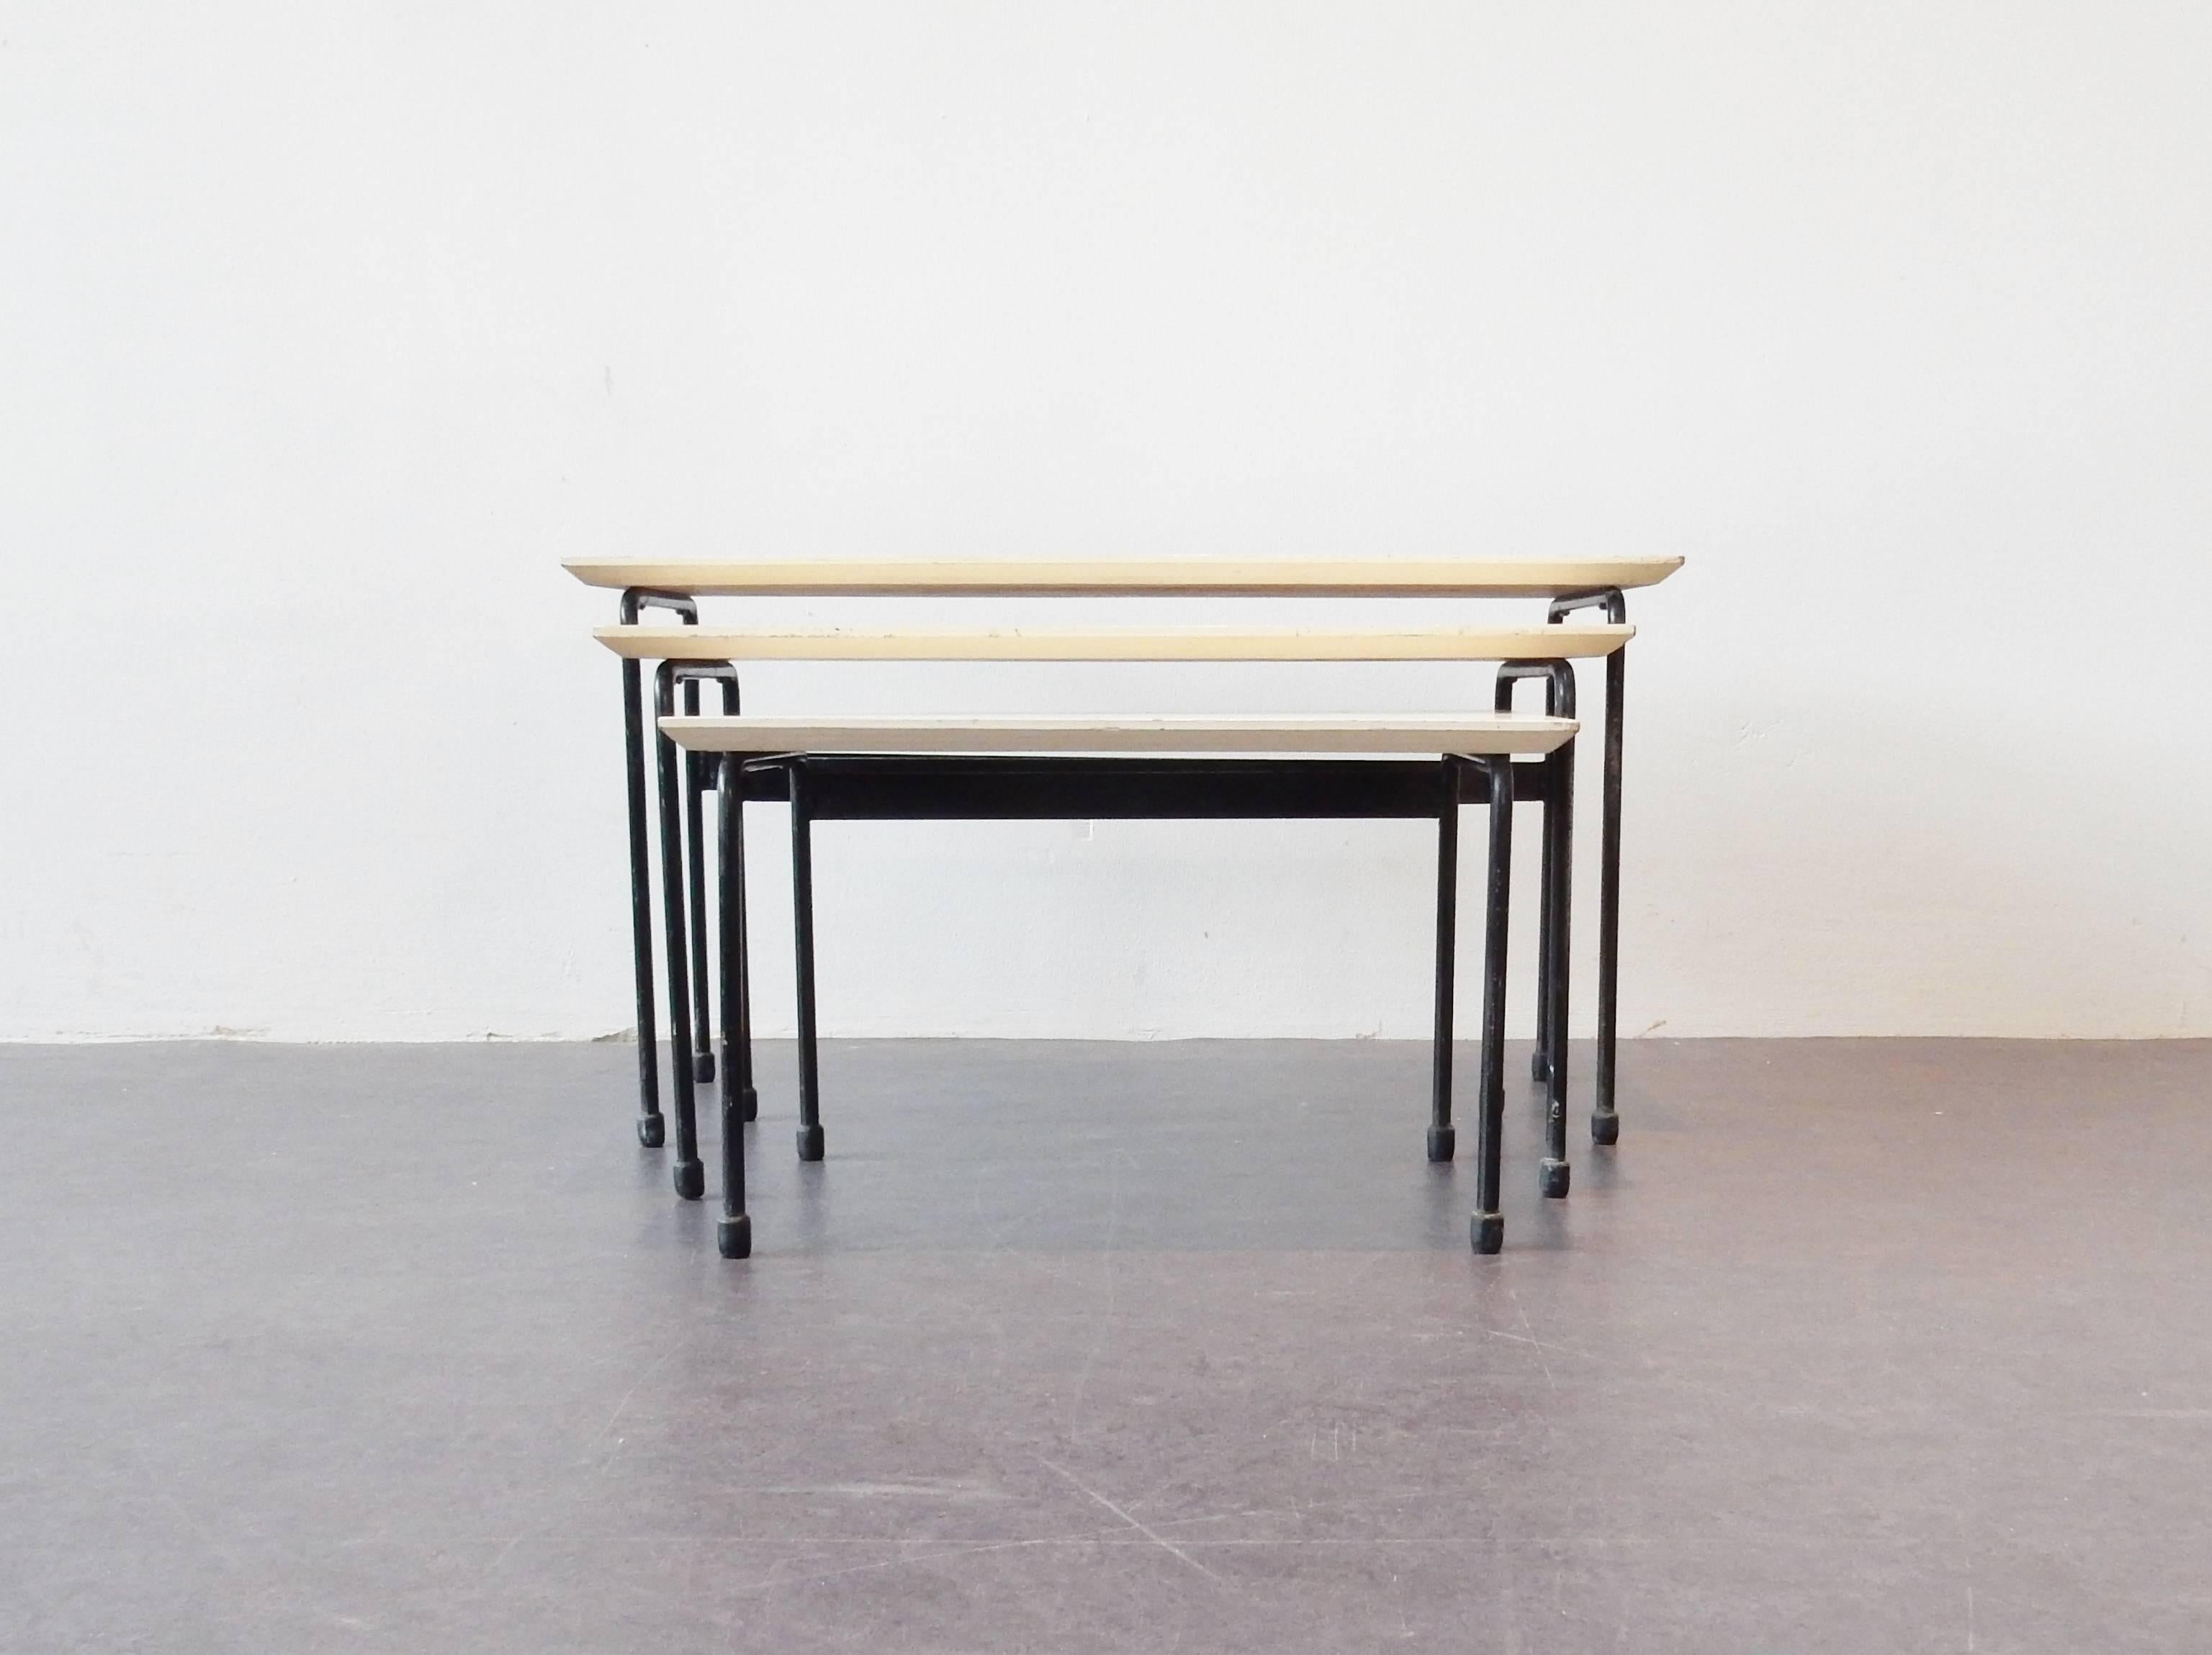 This set of three nesting tables are a design by Martin Visser for the Dutch design firm 't Spectrum. These tables have been given the name 'Twello' and were only in production for 1 year between 1956 and 1957. This complete set of three is in full